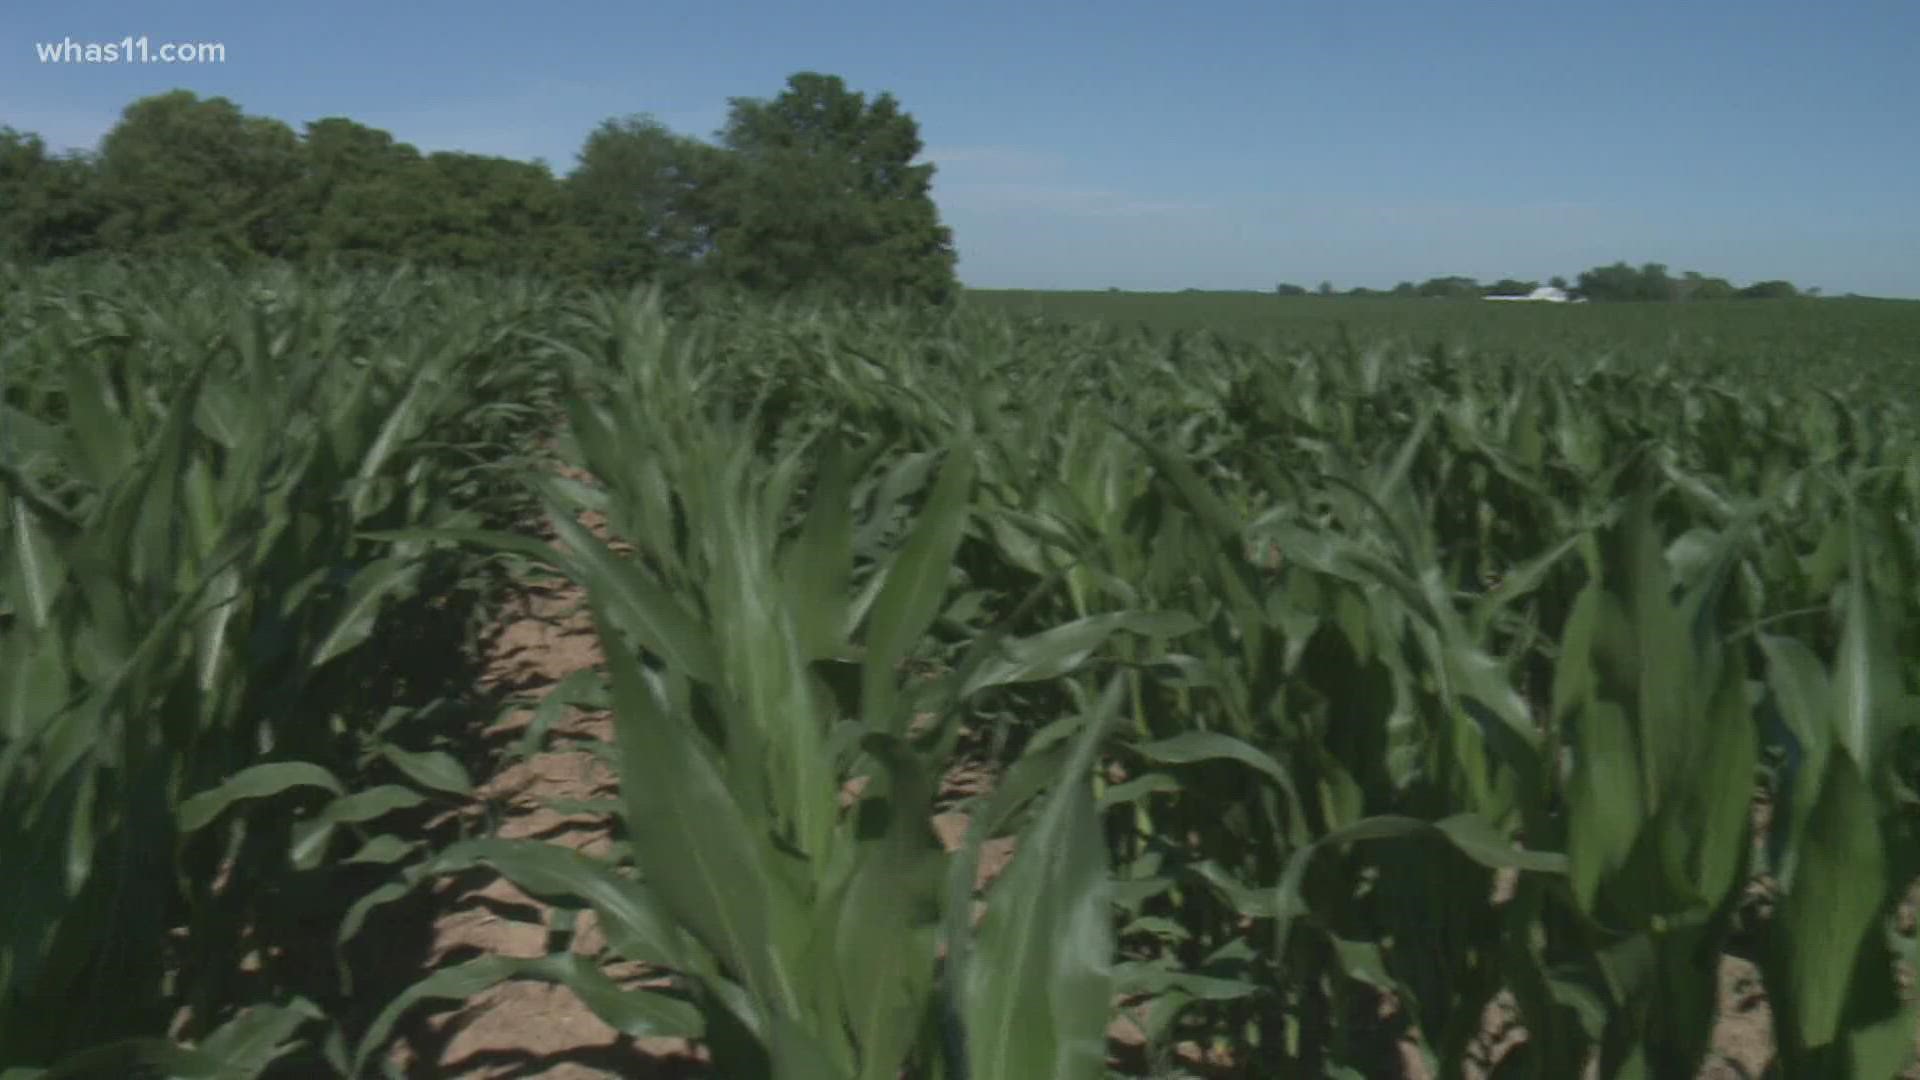 Local farmers say with the rising costs to get seeds planted, this dry heat is a problem.